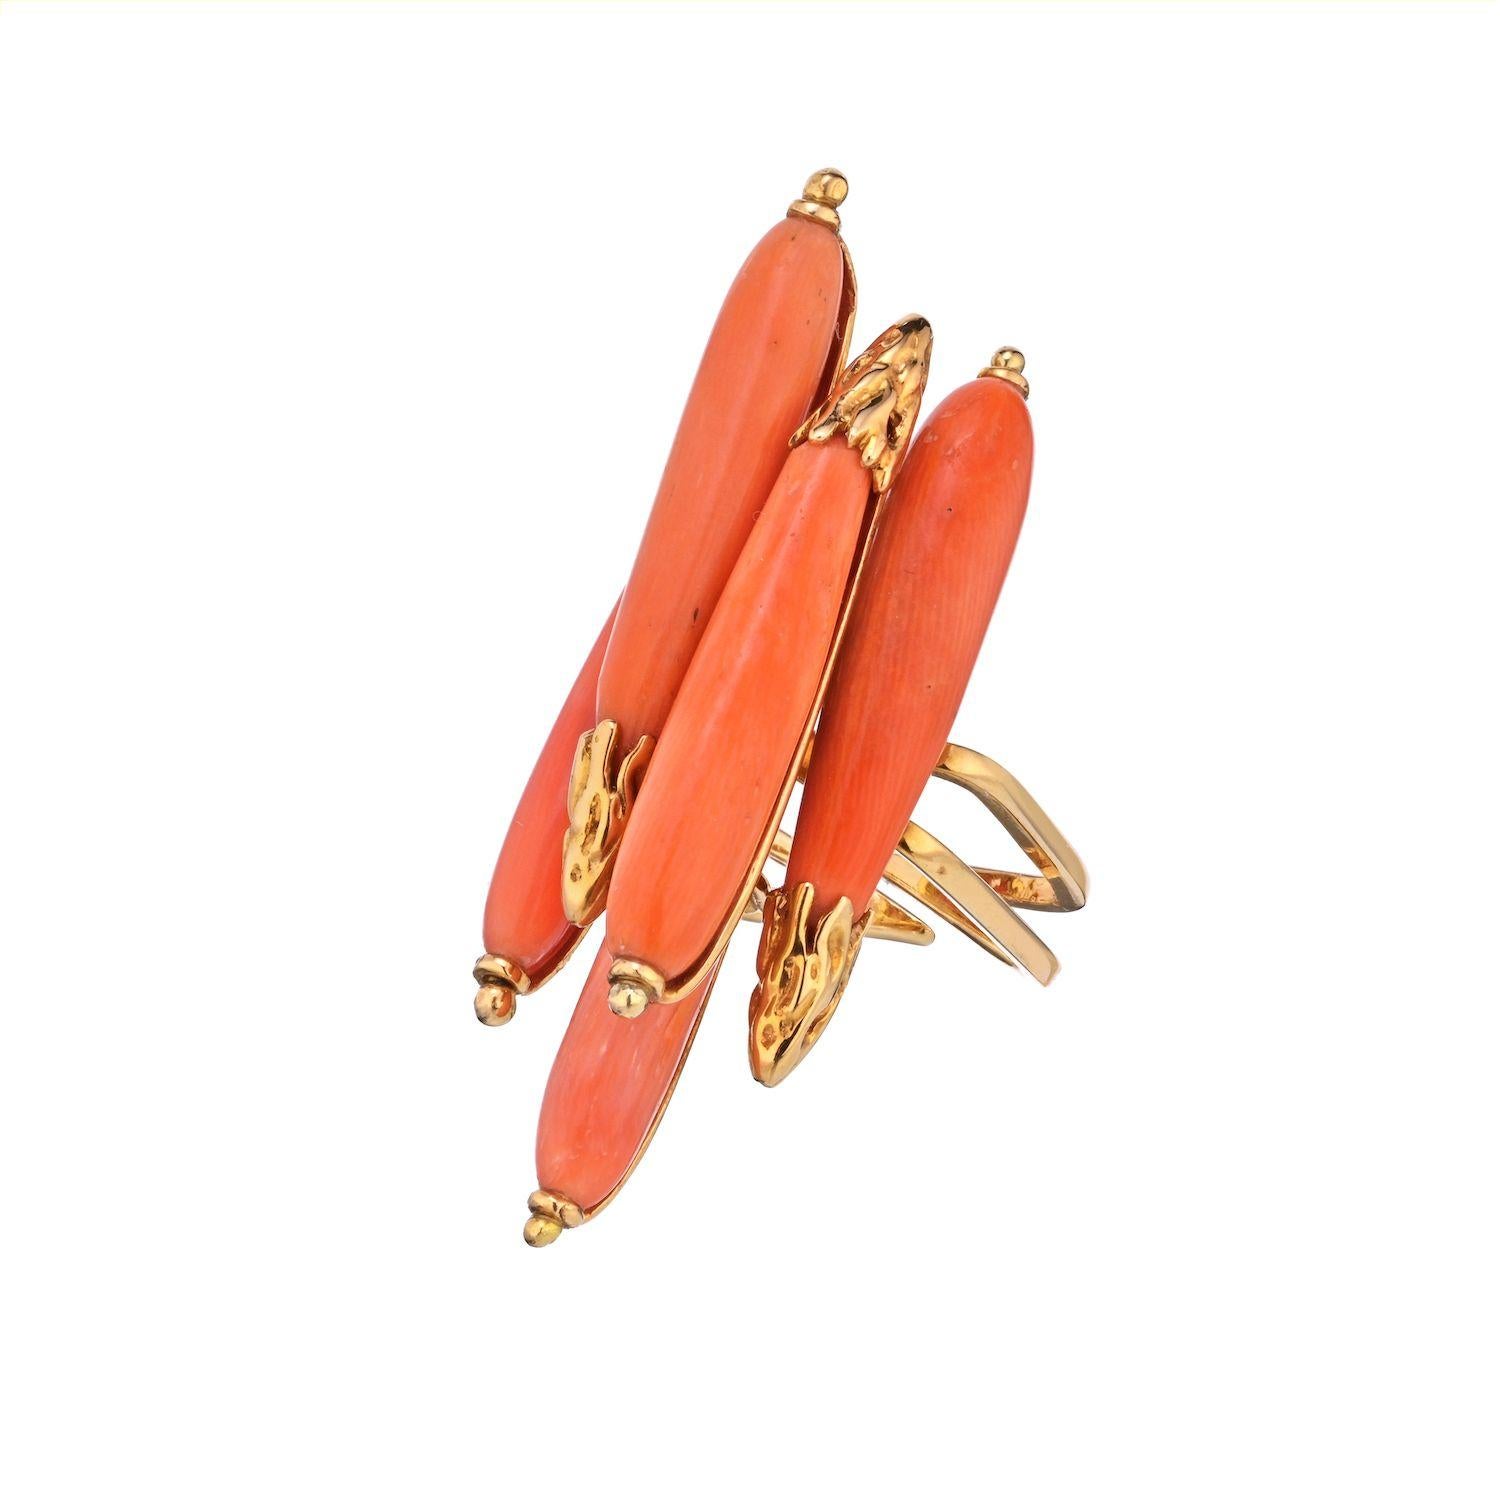 Sterle 18K Yellow Gold Elongated Multi Coral Estate Ring.
Unique and dramatic design.
Coral and yellow Gold ring by Pierre Sterlé.
French marks.
Circa 1960.